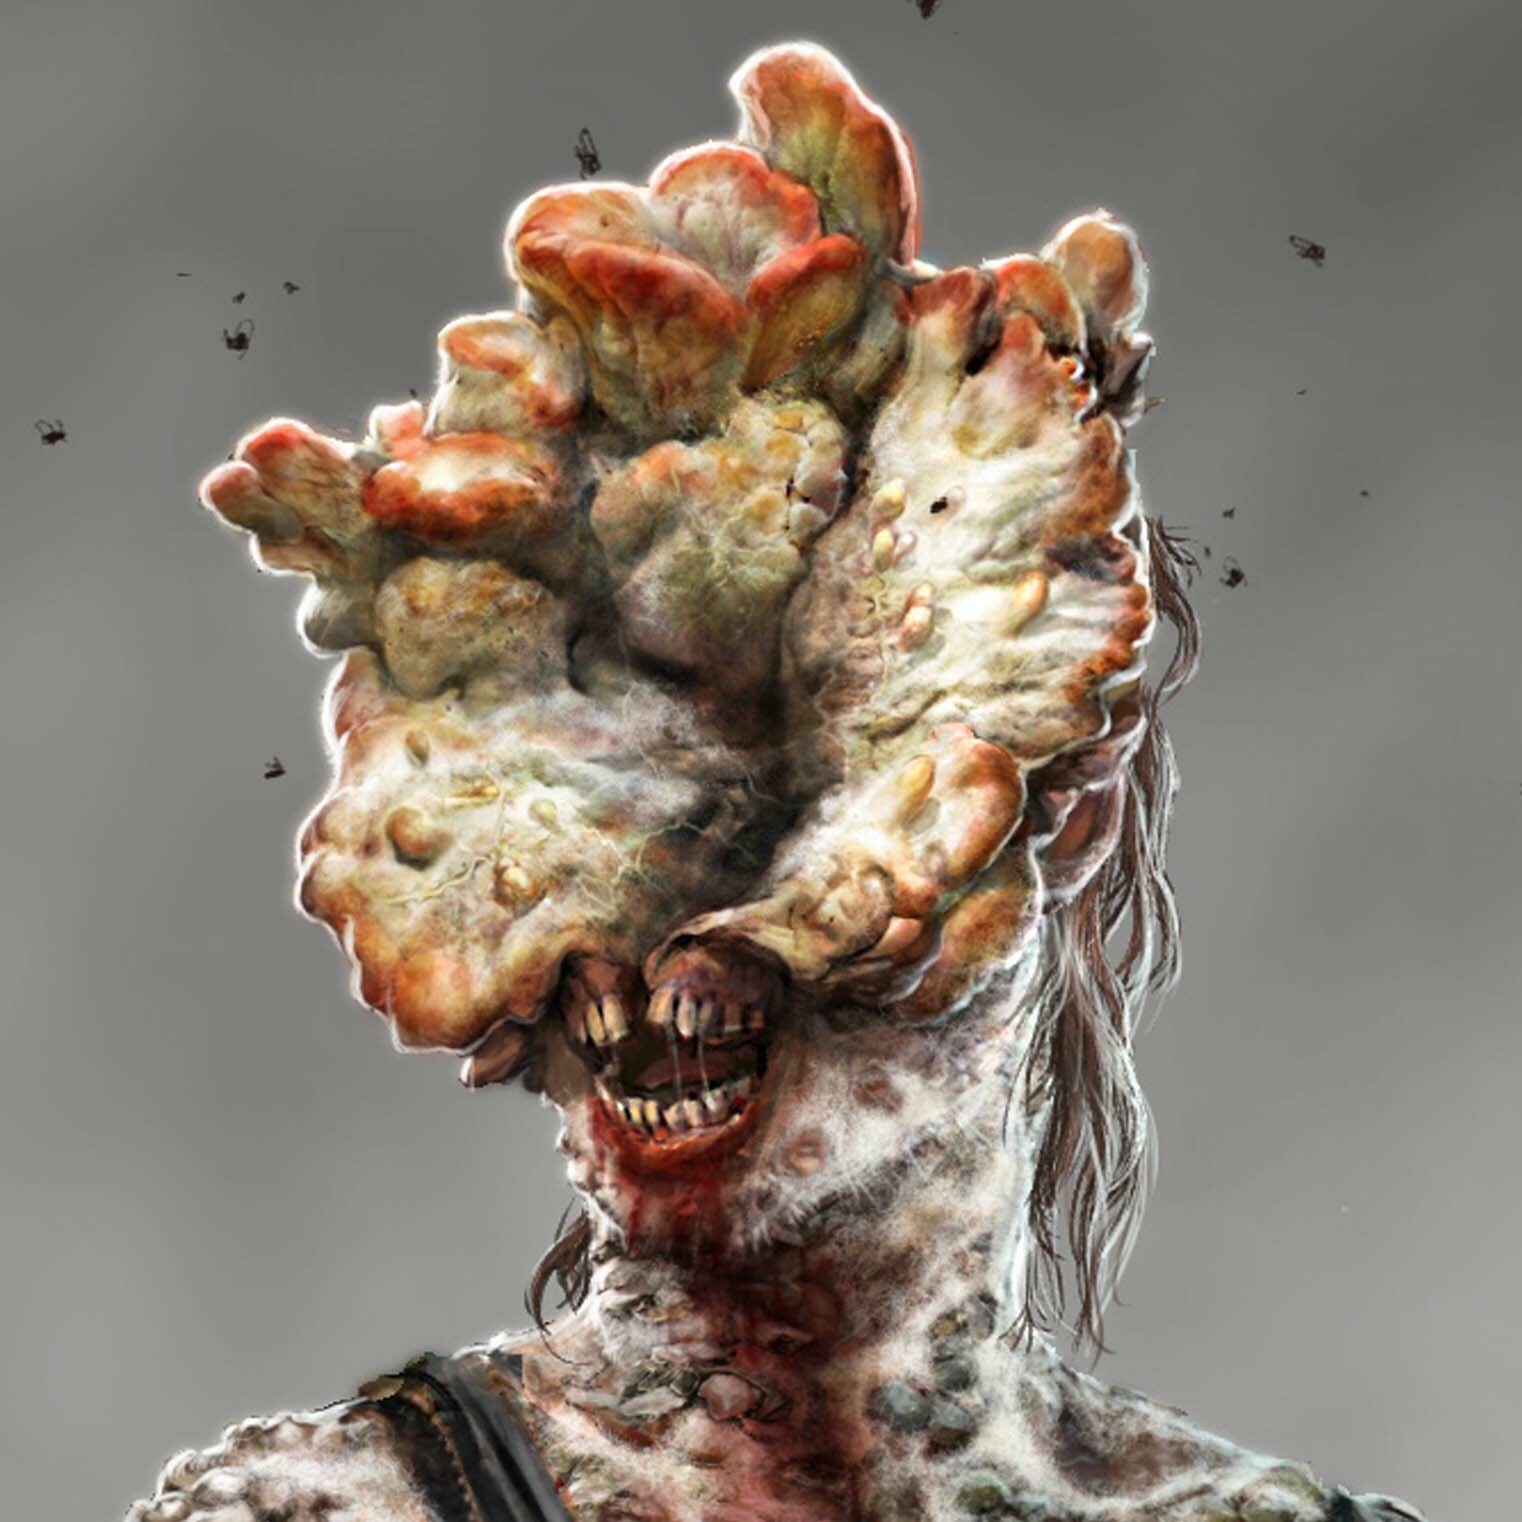 What happens if you rip off the clickers fungi from their face would they  die or something : r/TheLastOfUs2